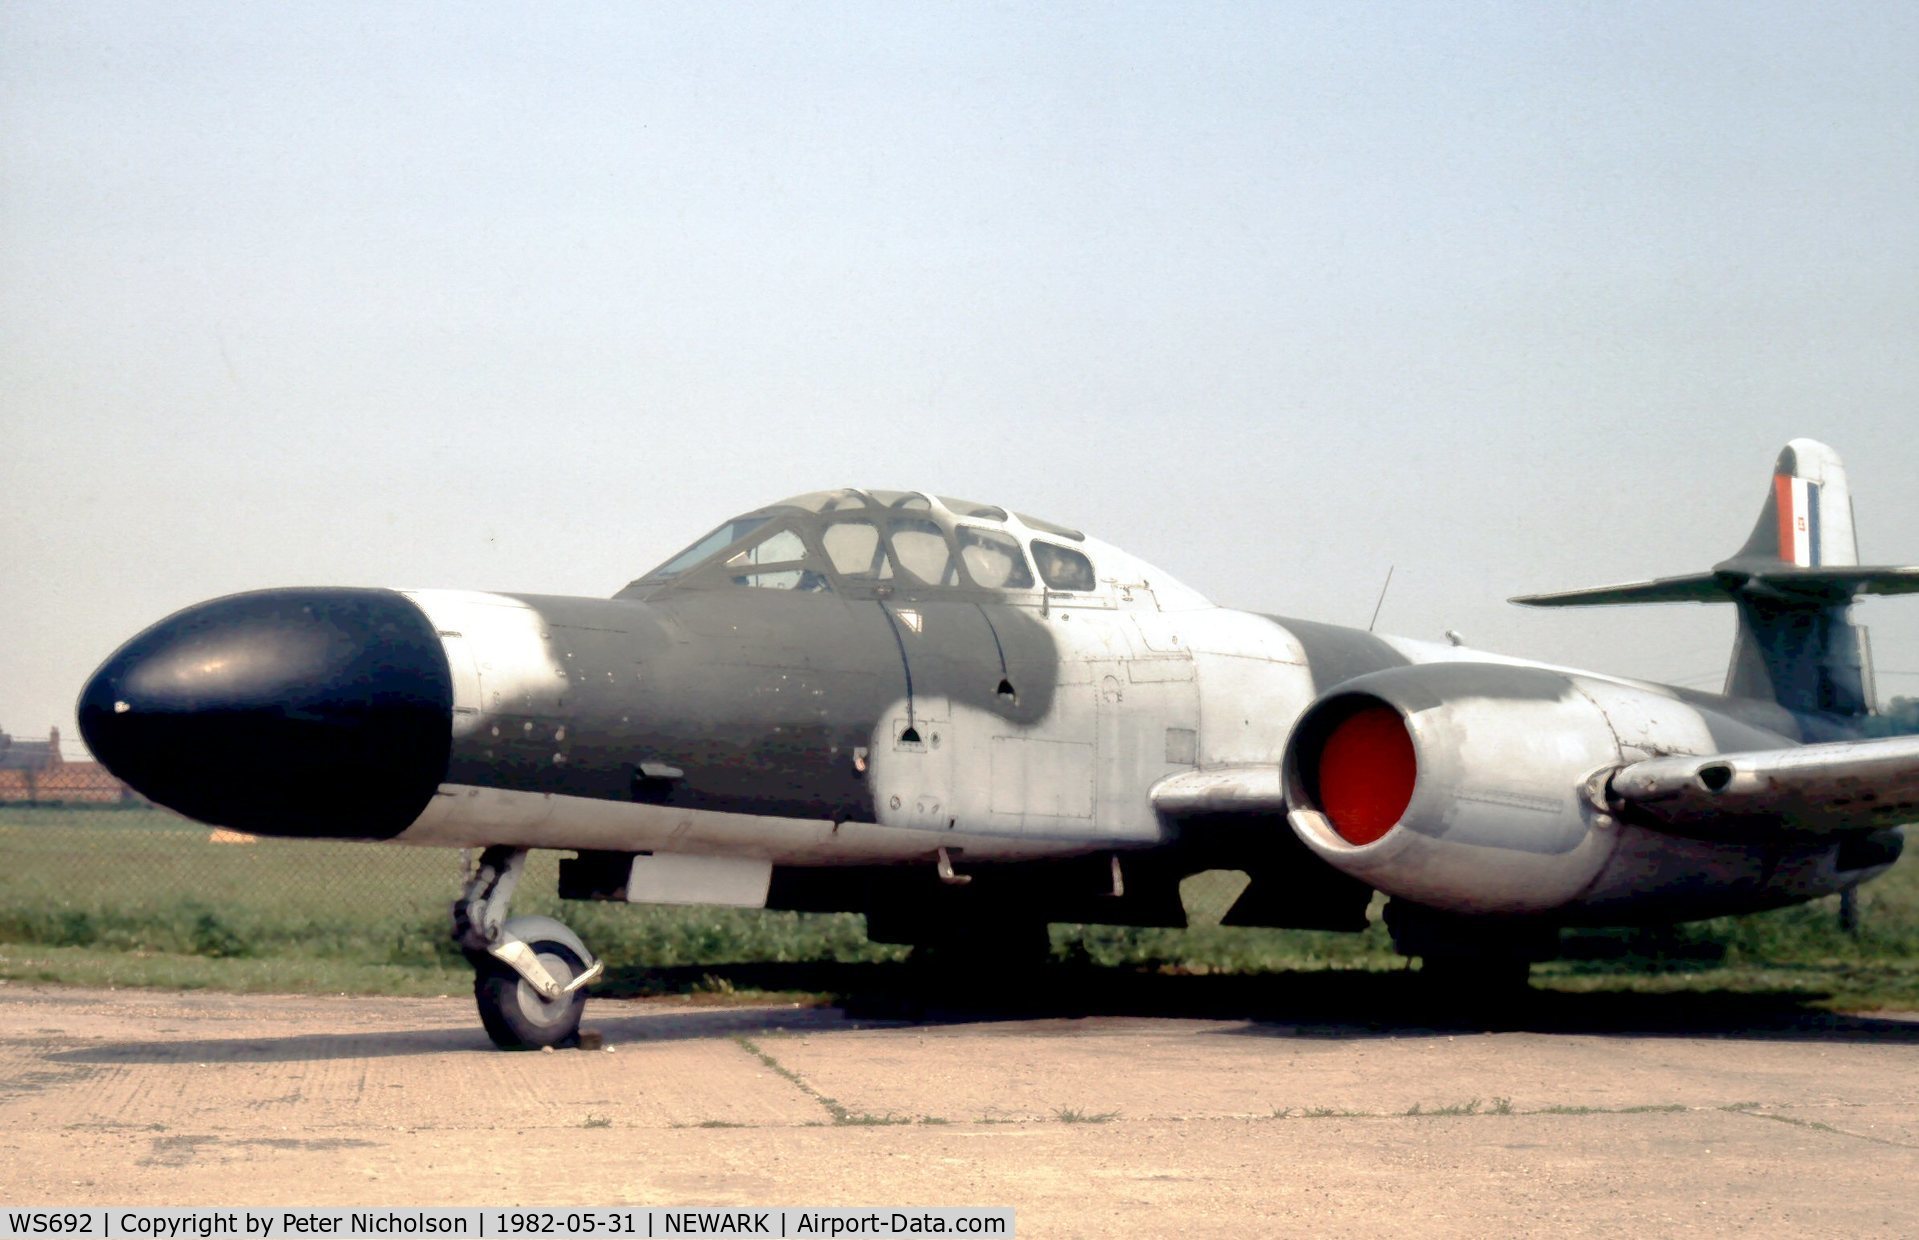 WS692, Gloster Meteor NF.12 C/N Not found WS692, Meteor NF.12 of the Newark Air Museum as seen in May 1982.